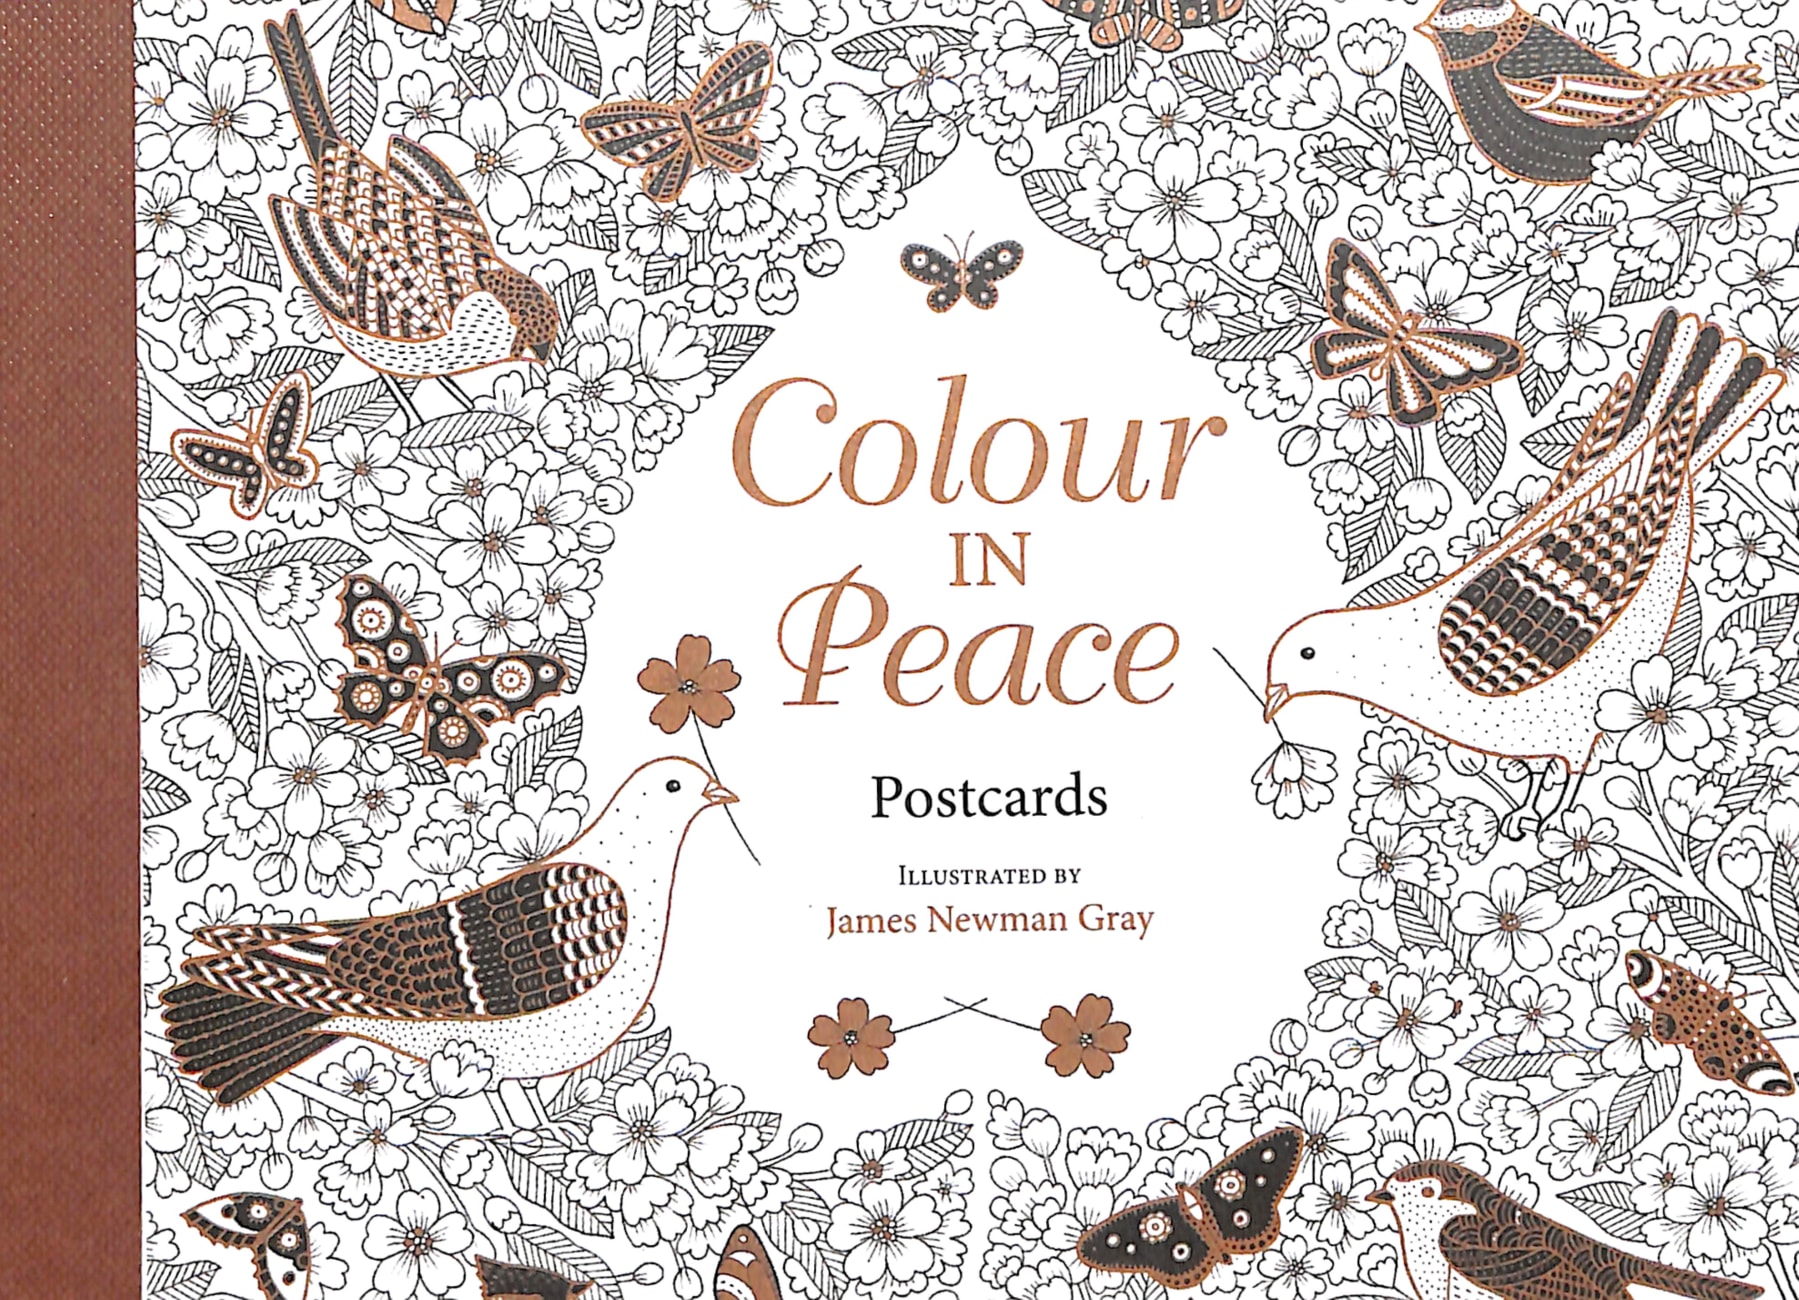 Colour in Peace (Postcards In Book) Paperback